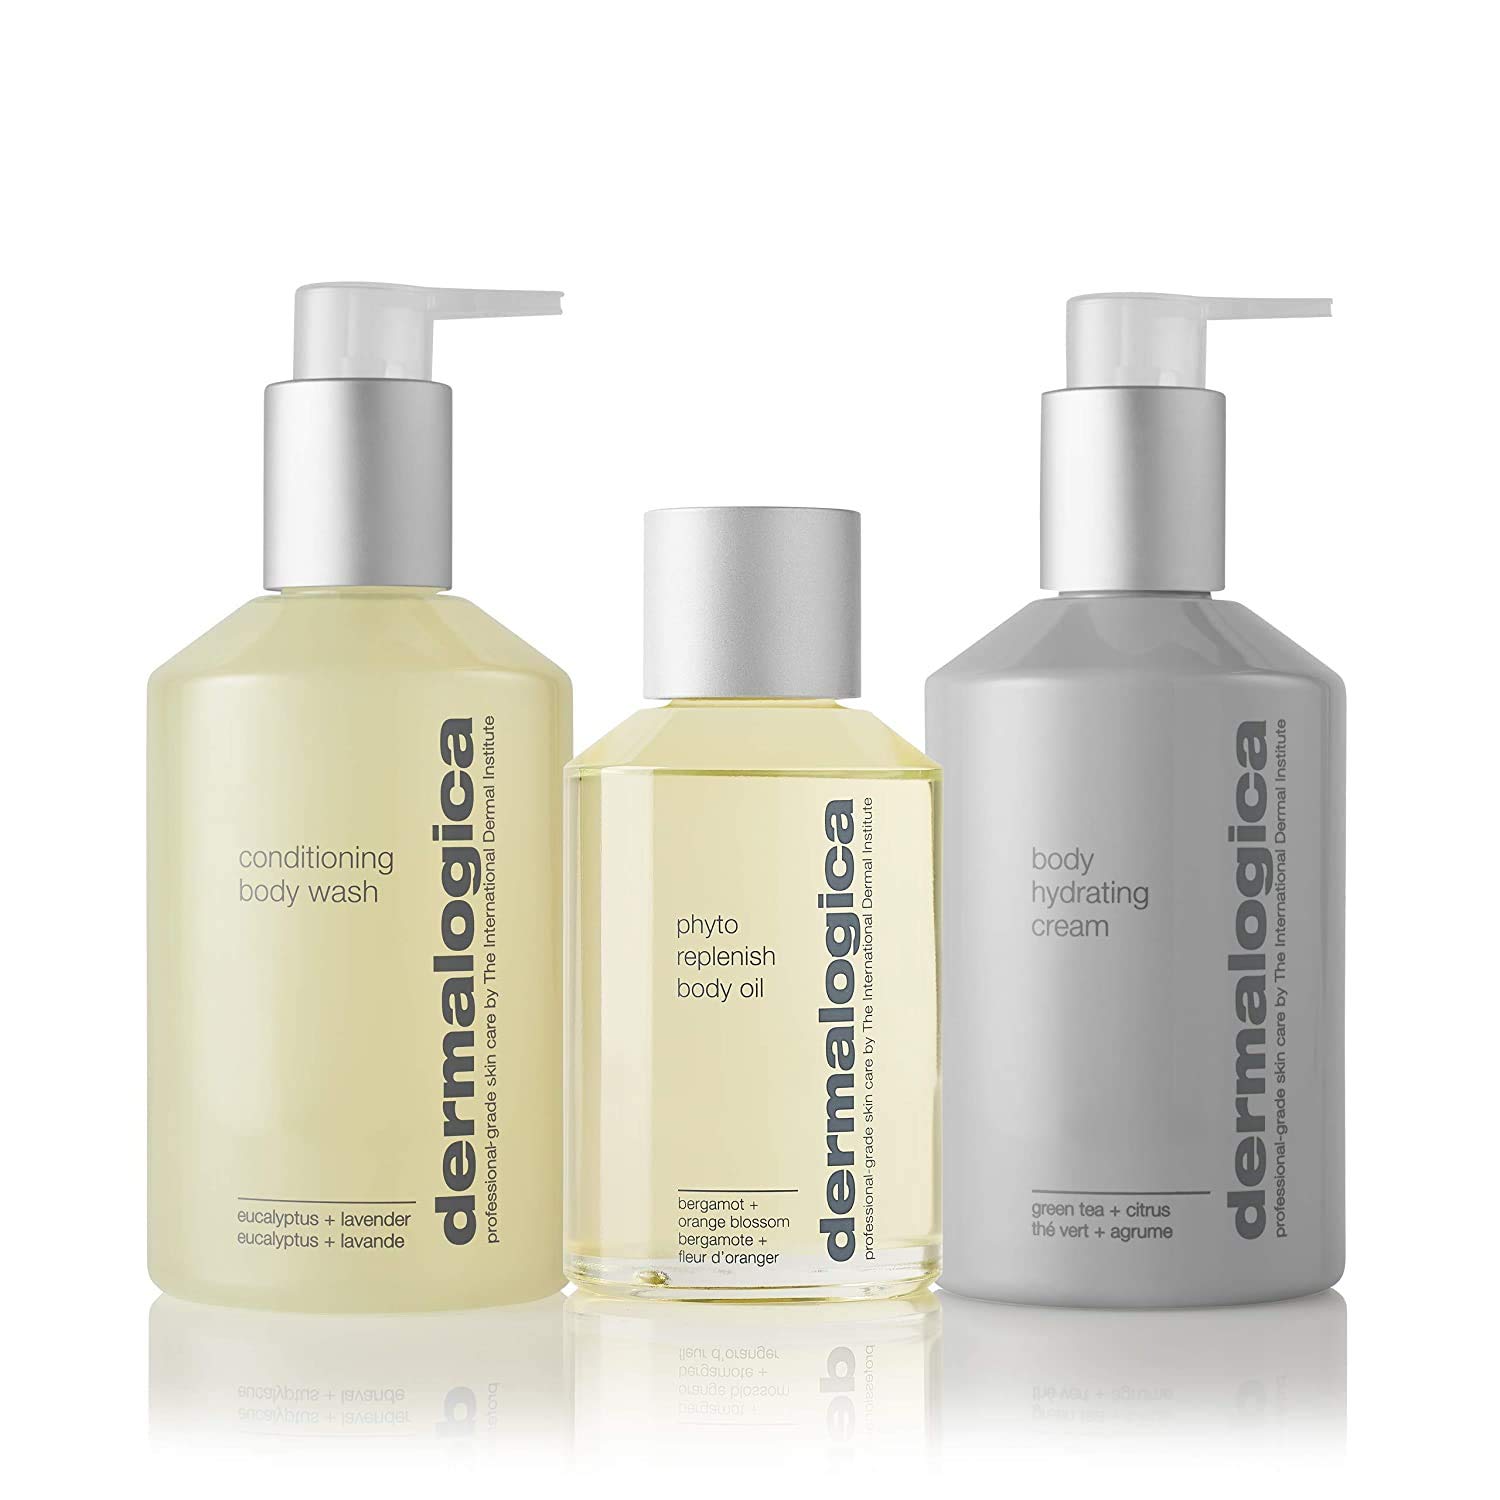 Dermalogica Body Care Set - Includes: Body Wash, Body Oil, and Body Cream - Hydrates and Conditions